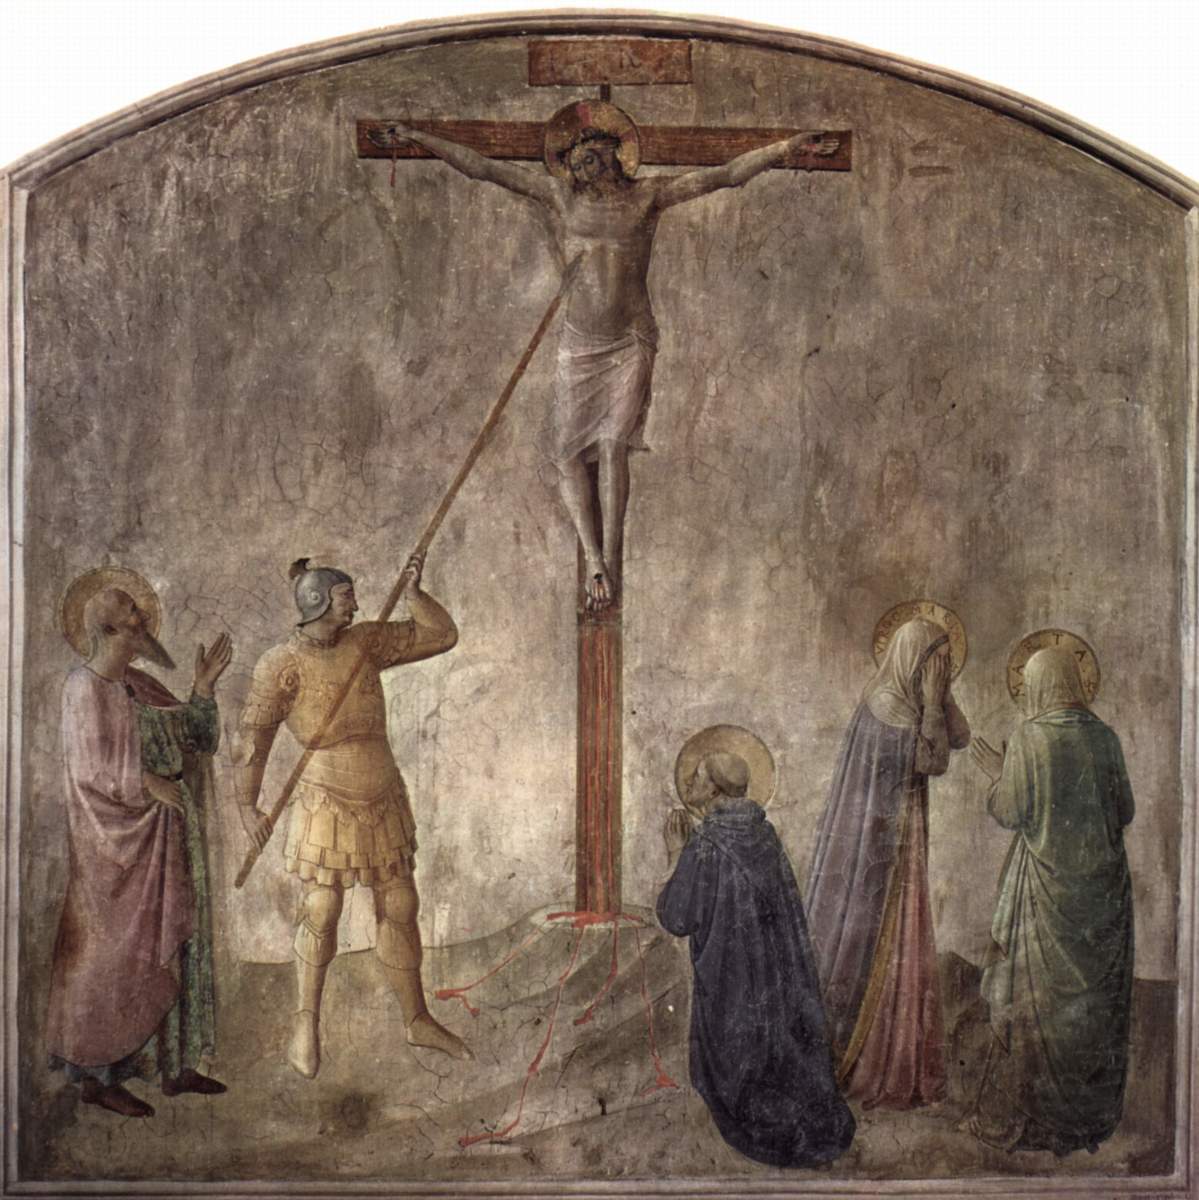 from Fra Angelico (1395-1455)